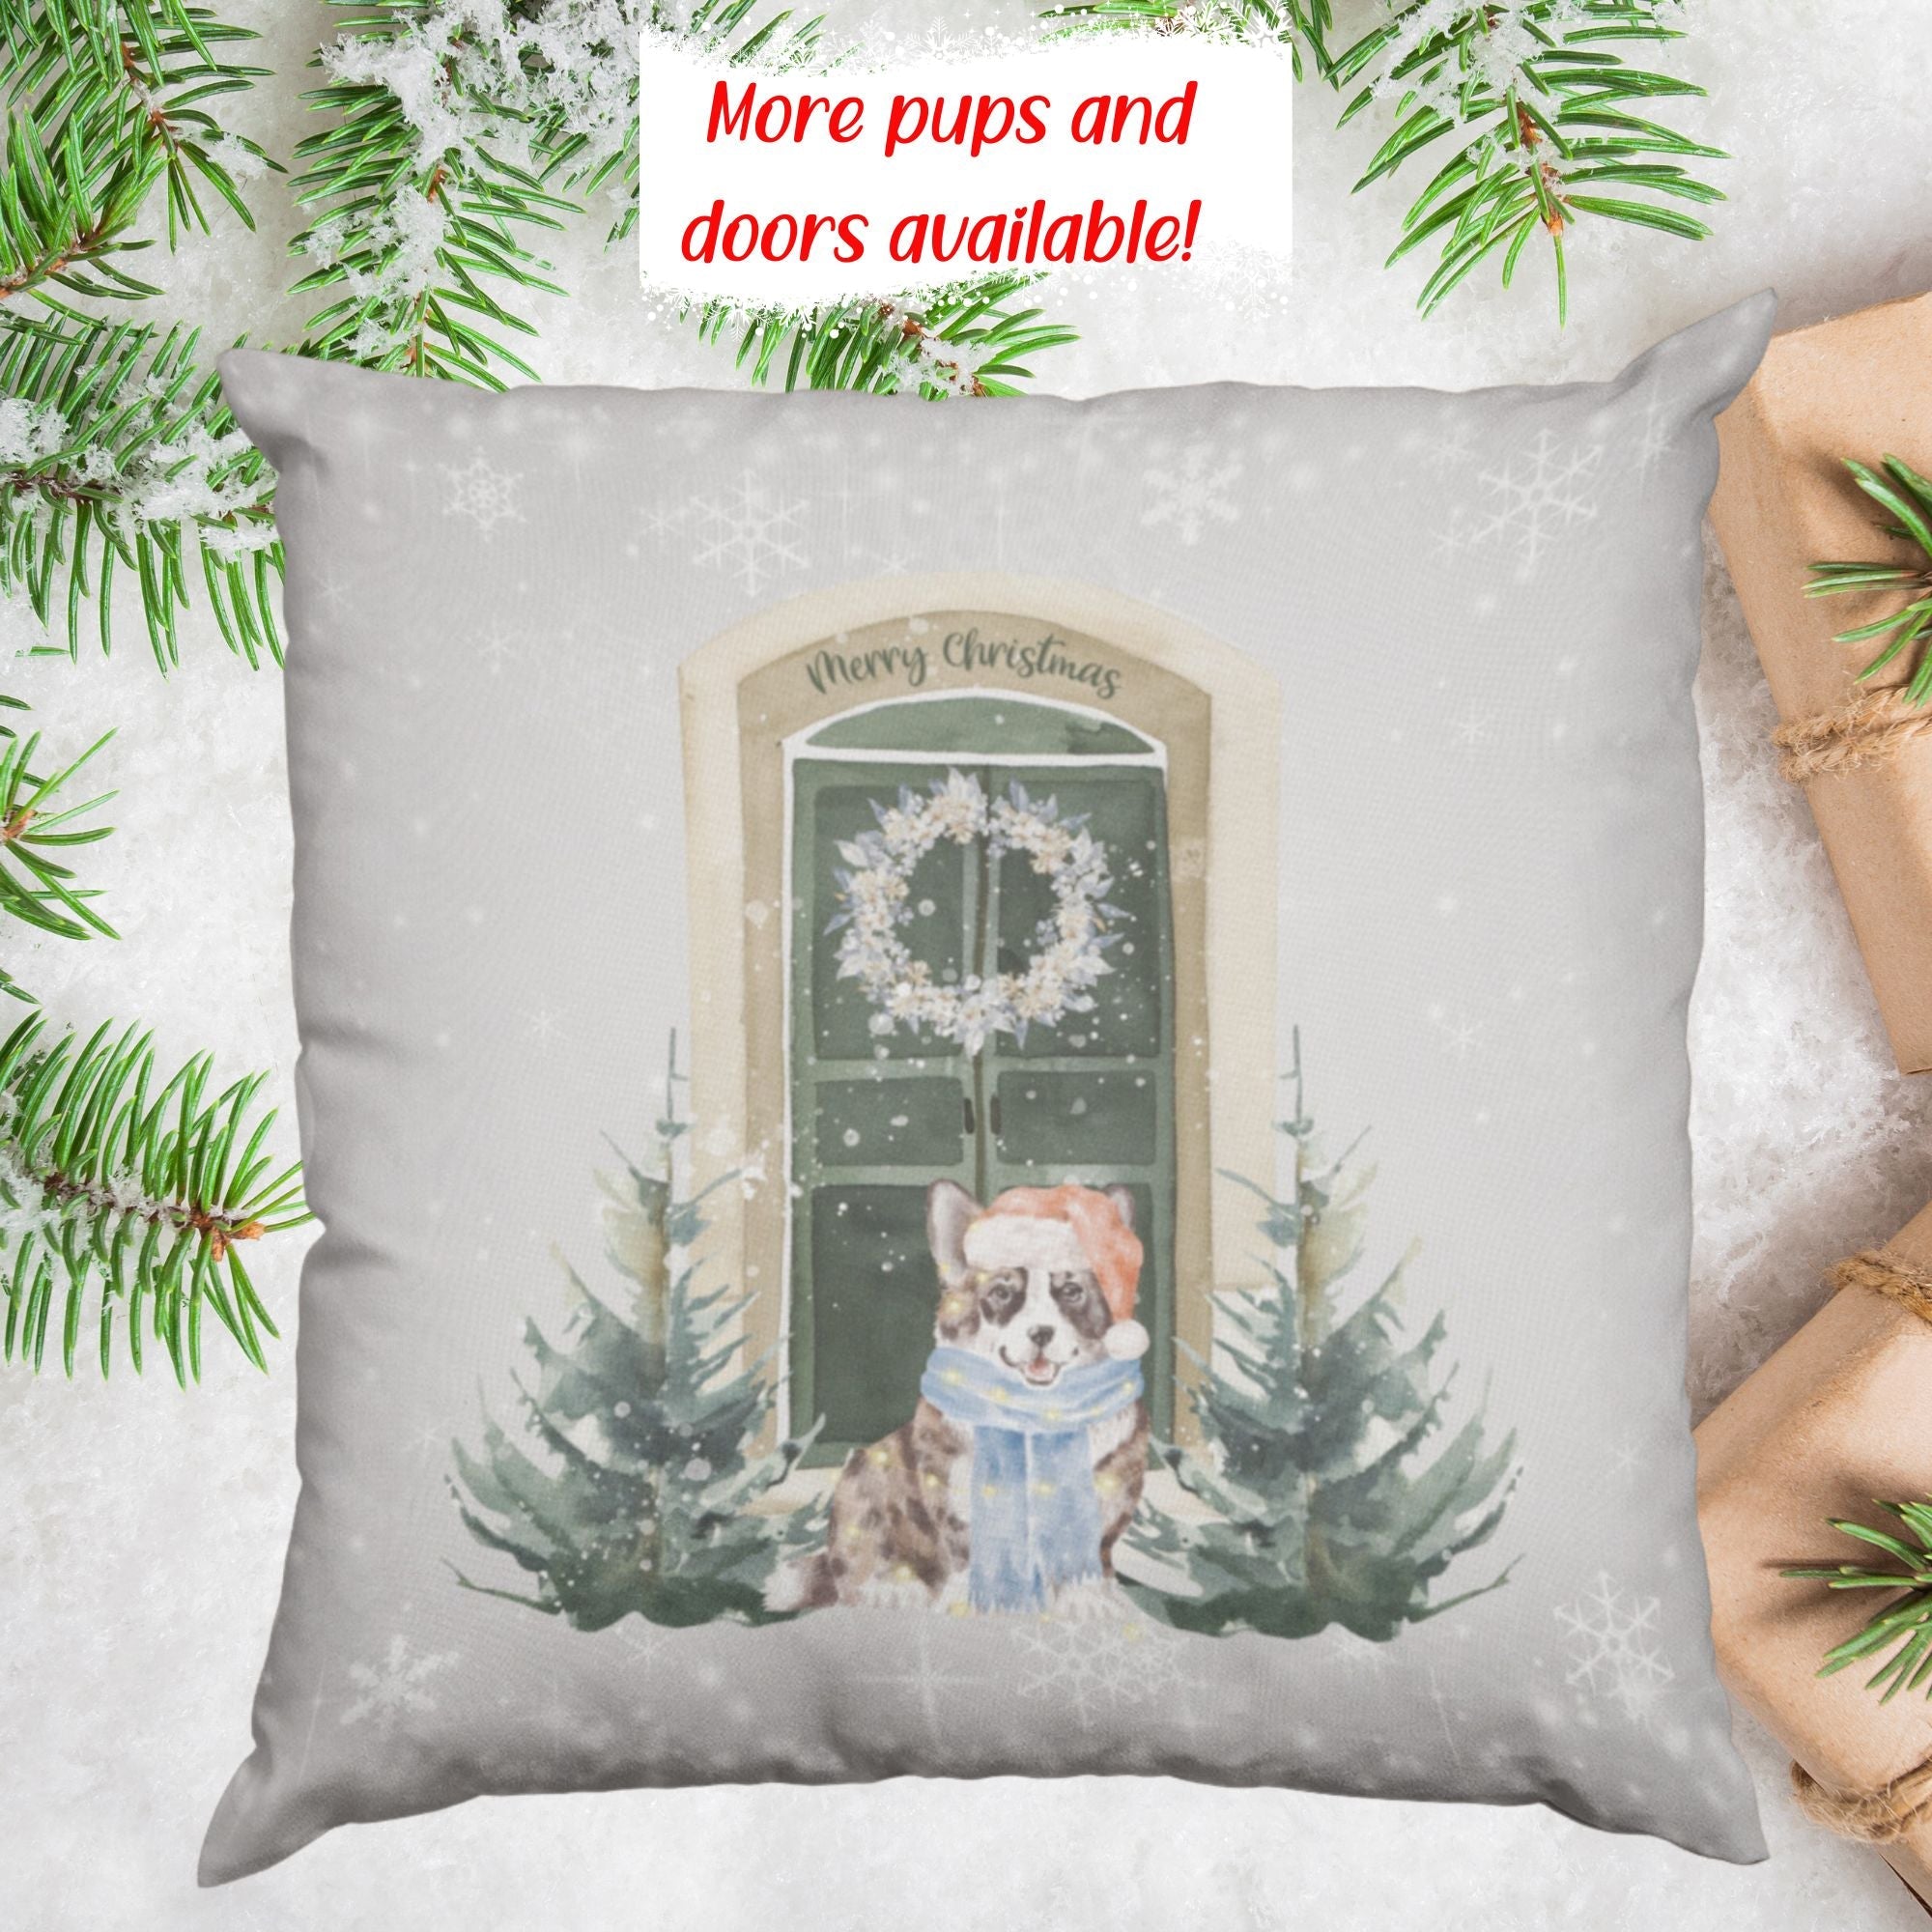 Christmas Cushion Decorative Gift Pillow - Sweetie